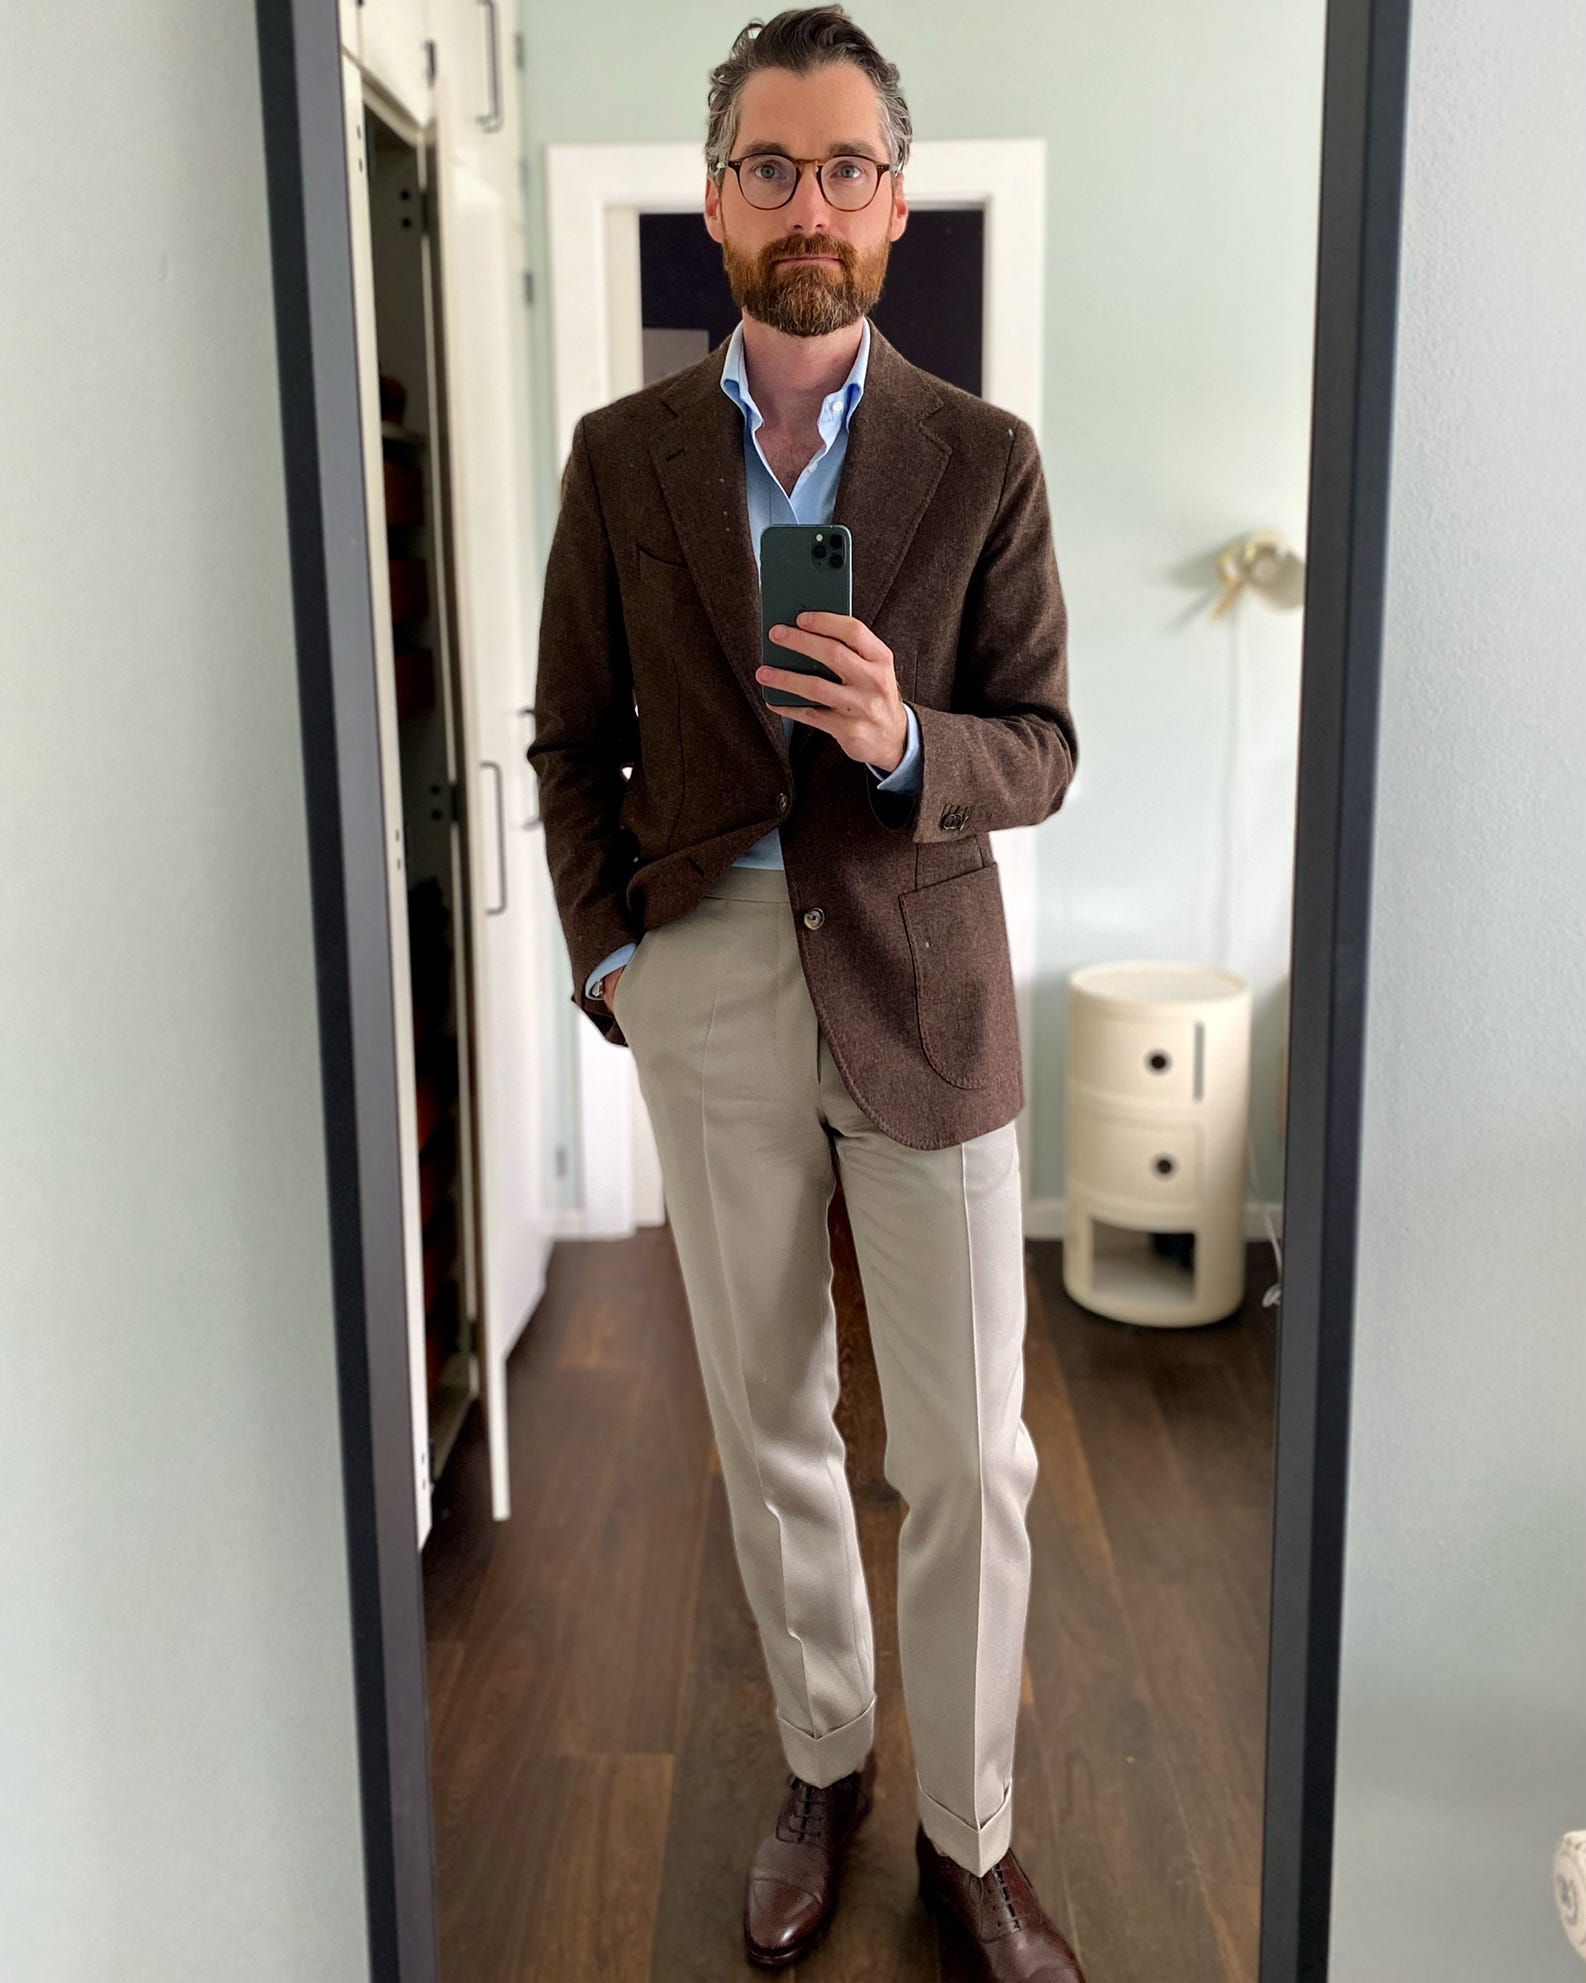 BrownsTailor - Back to the basics! Navy jacket, white shirt, grey trousers,  brown shoes and blue tie! Adding a bit of twist with a POW check waistcoat.  . . . . . . . . . #